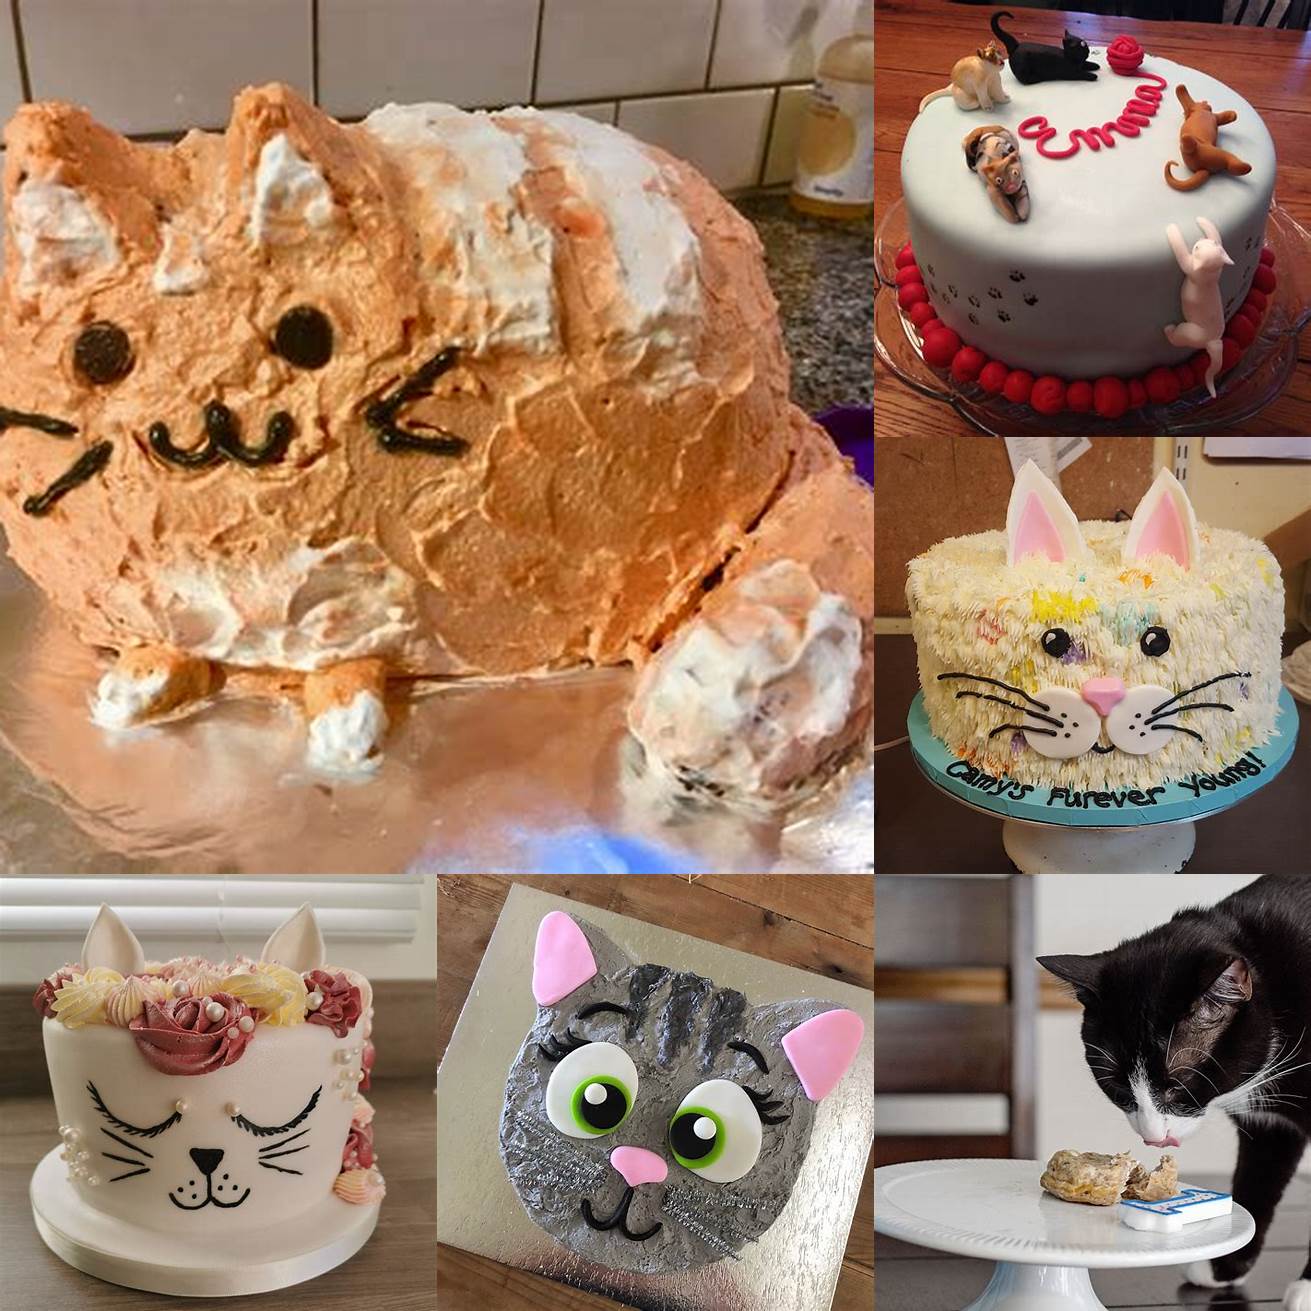 Image of the cat cake in the baking dish